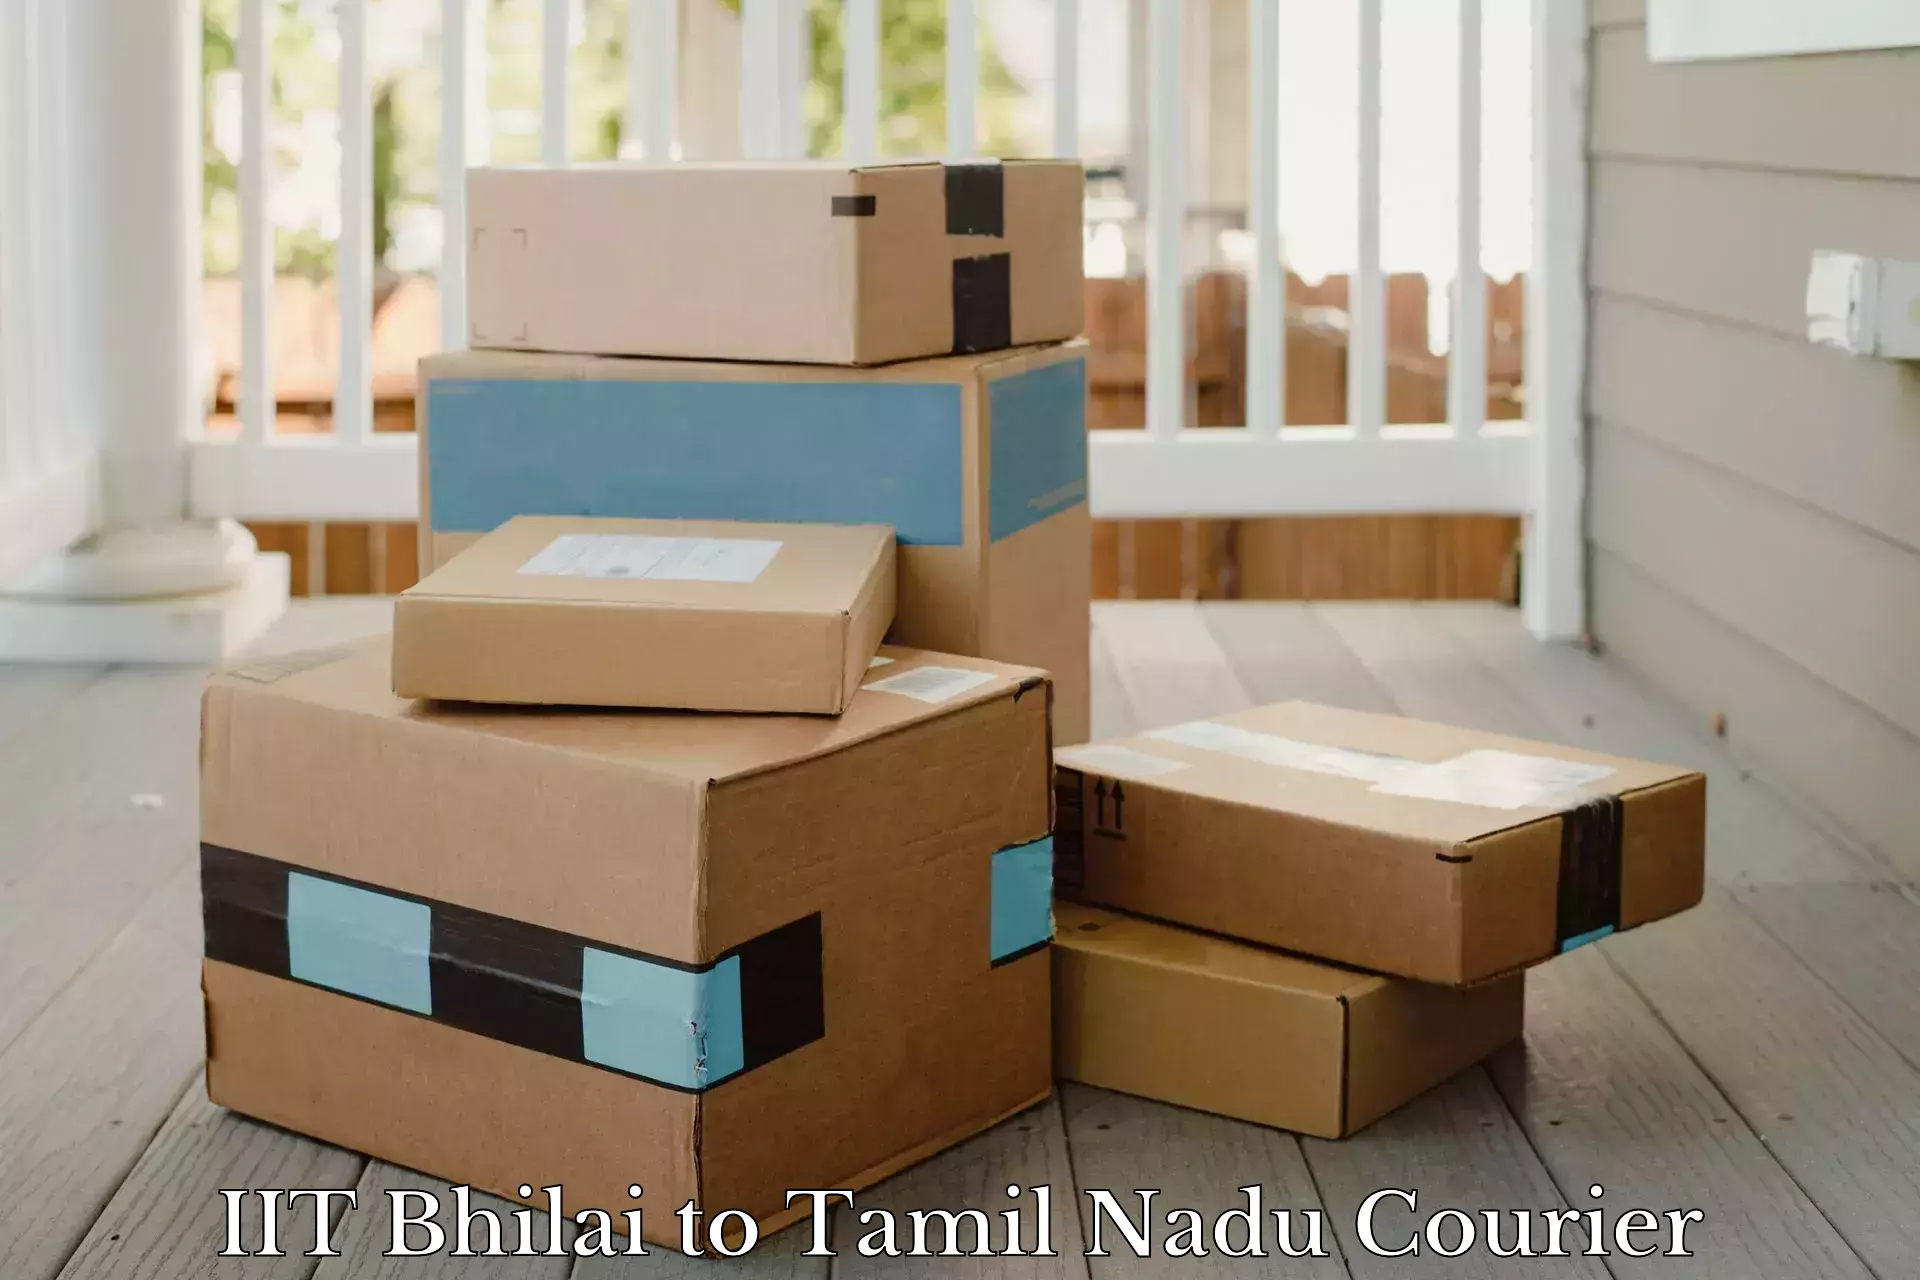 Customer-oriented courier services IIT Bhilai to Tamil Nadu